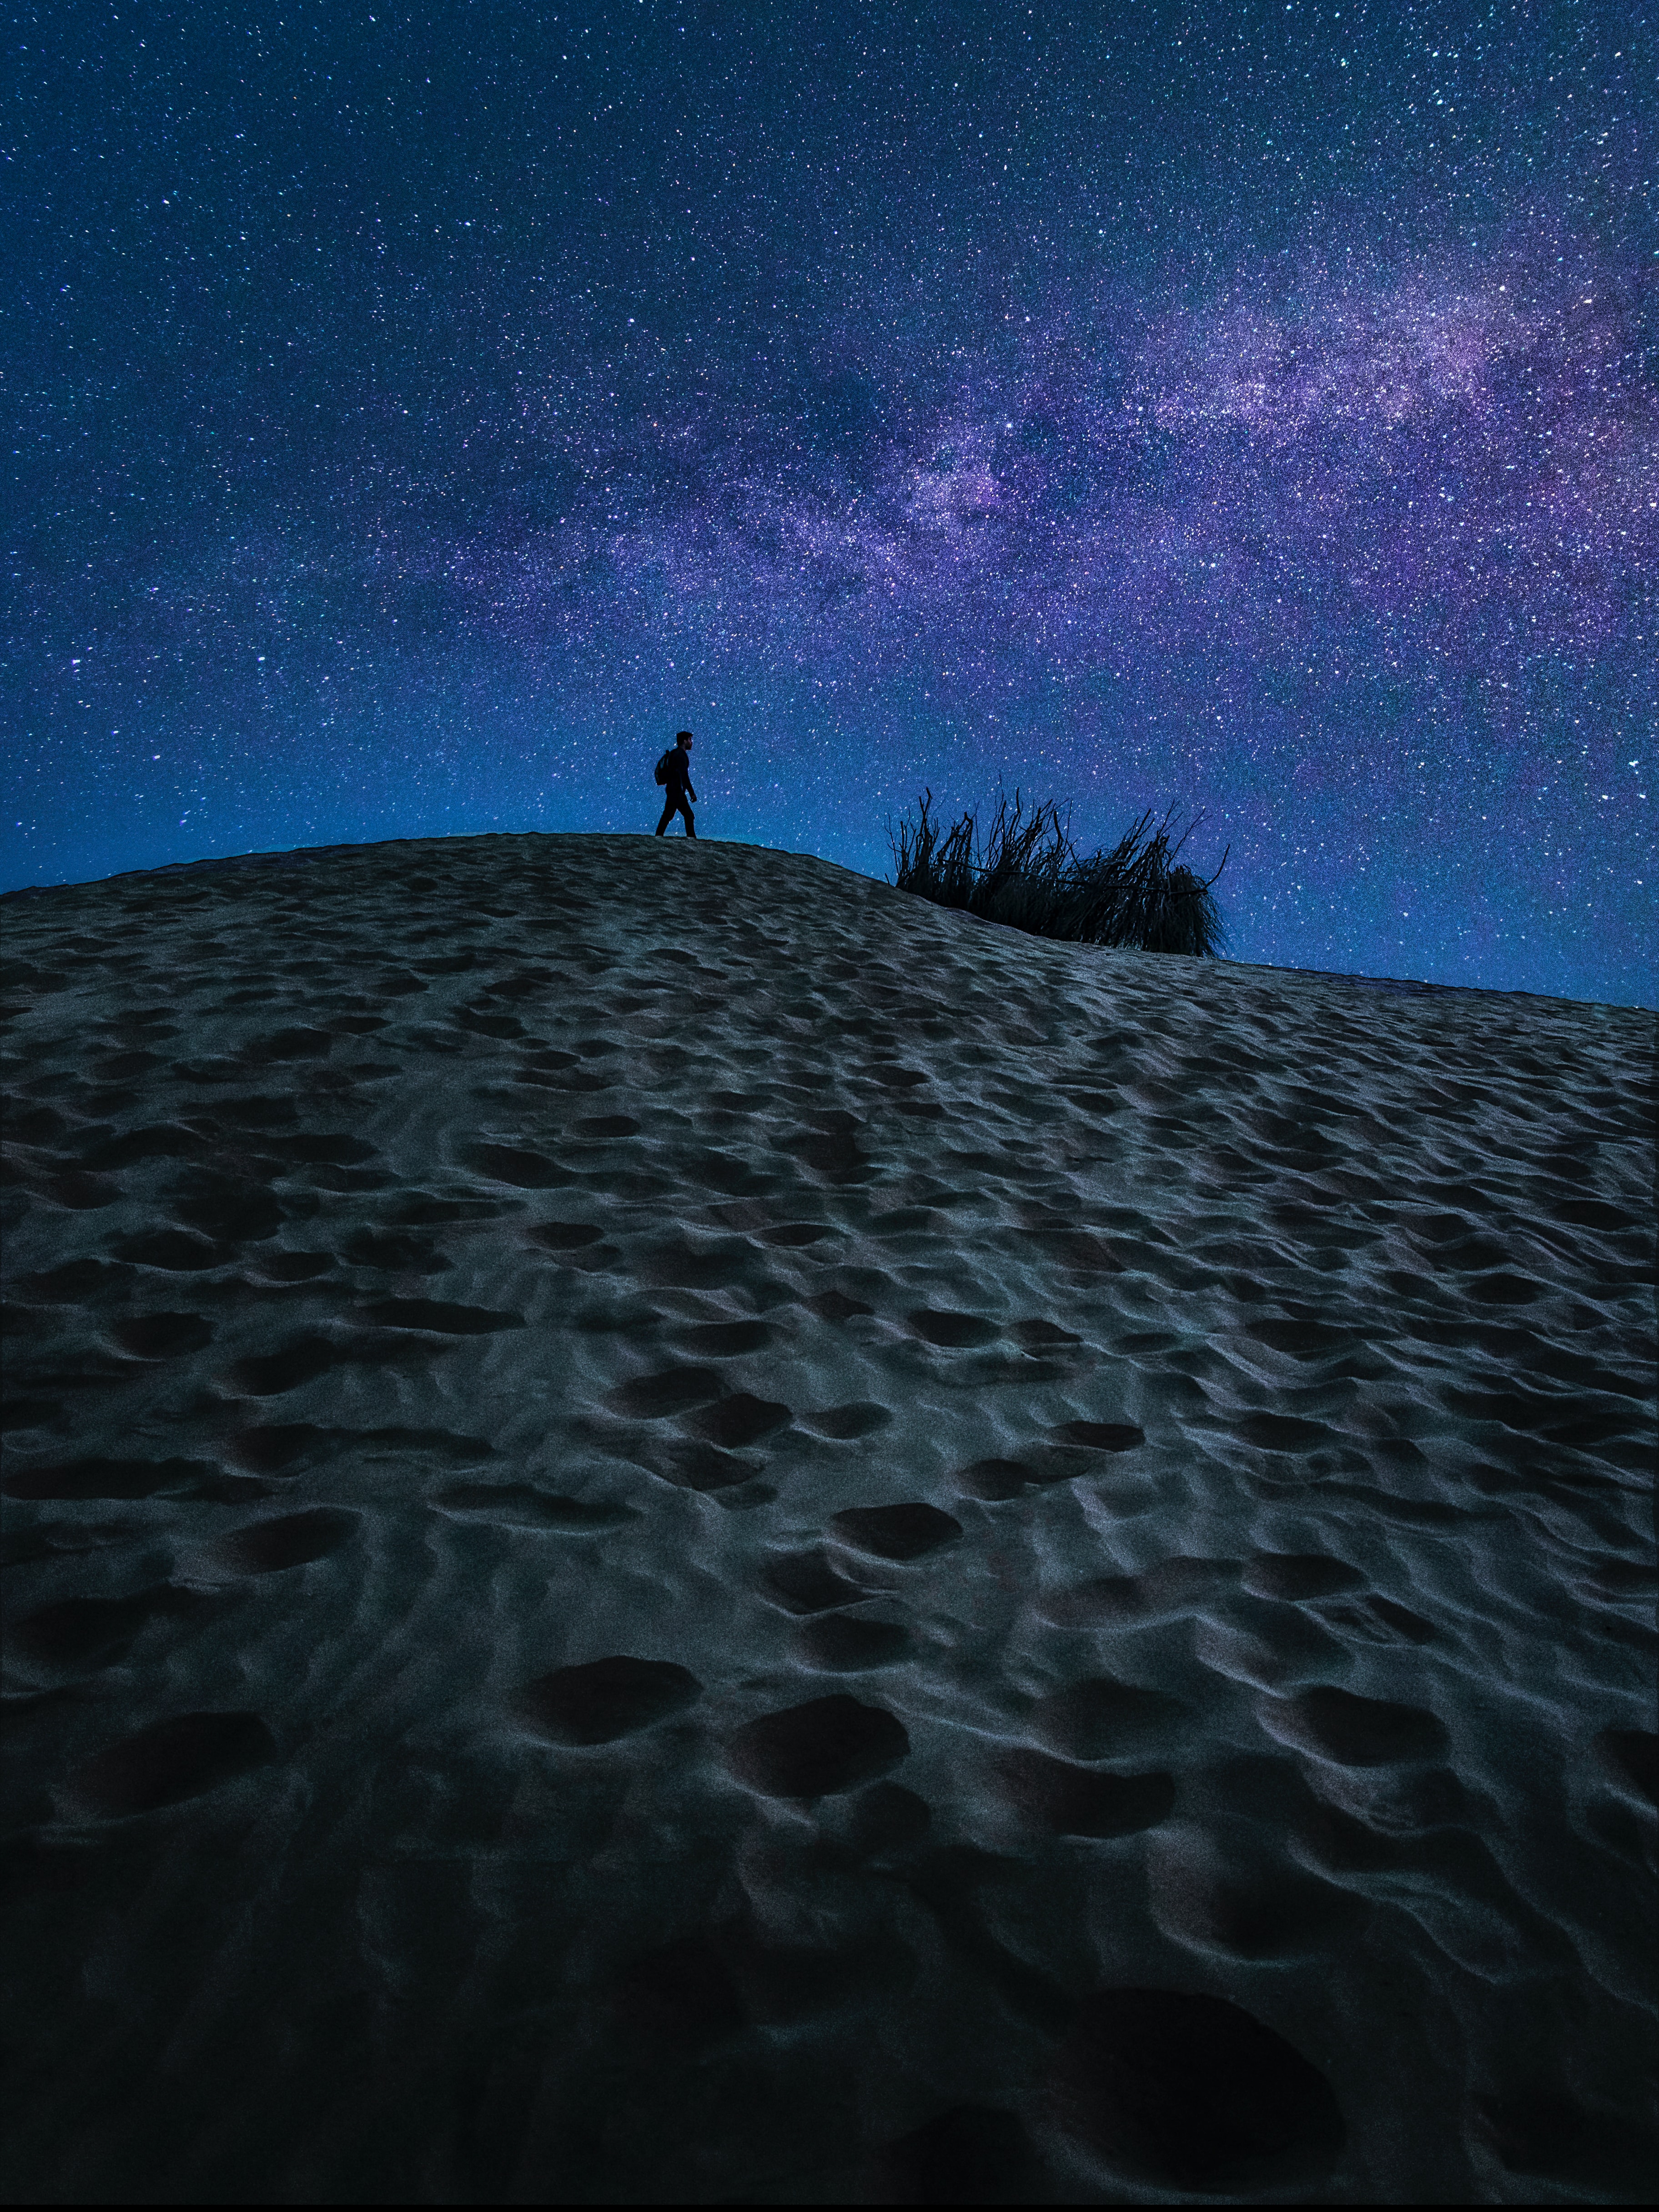 alone, sand, miscellanea, miscellaneous, starry sky, human, person, loneliness, lonely